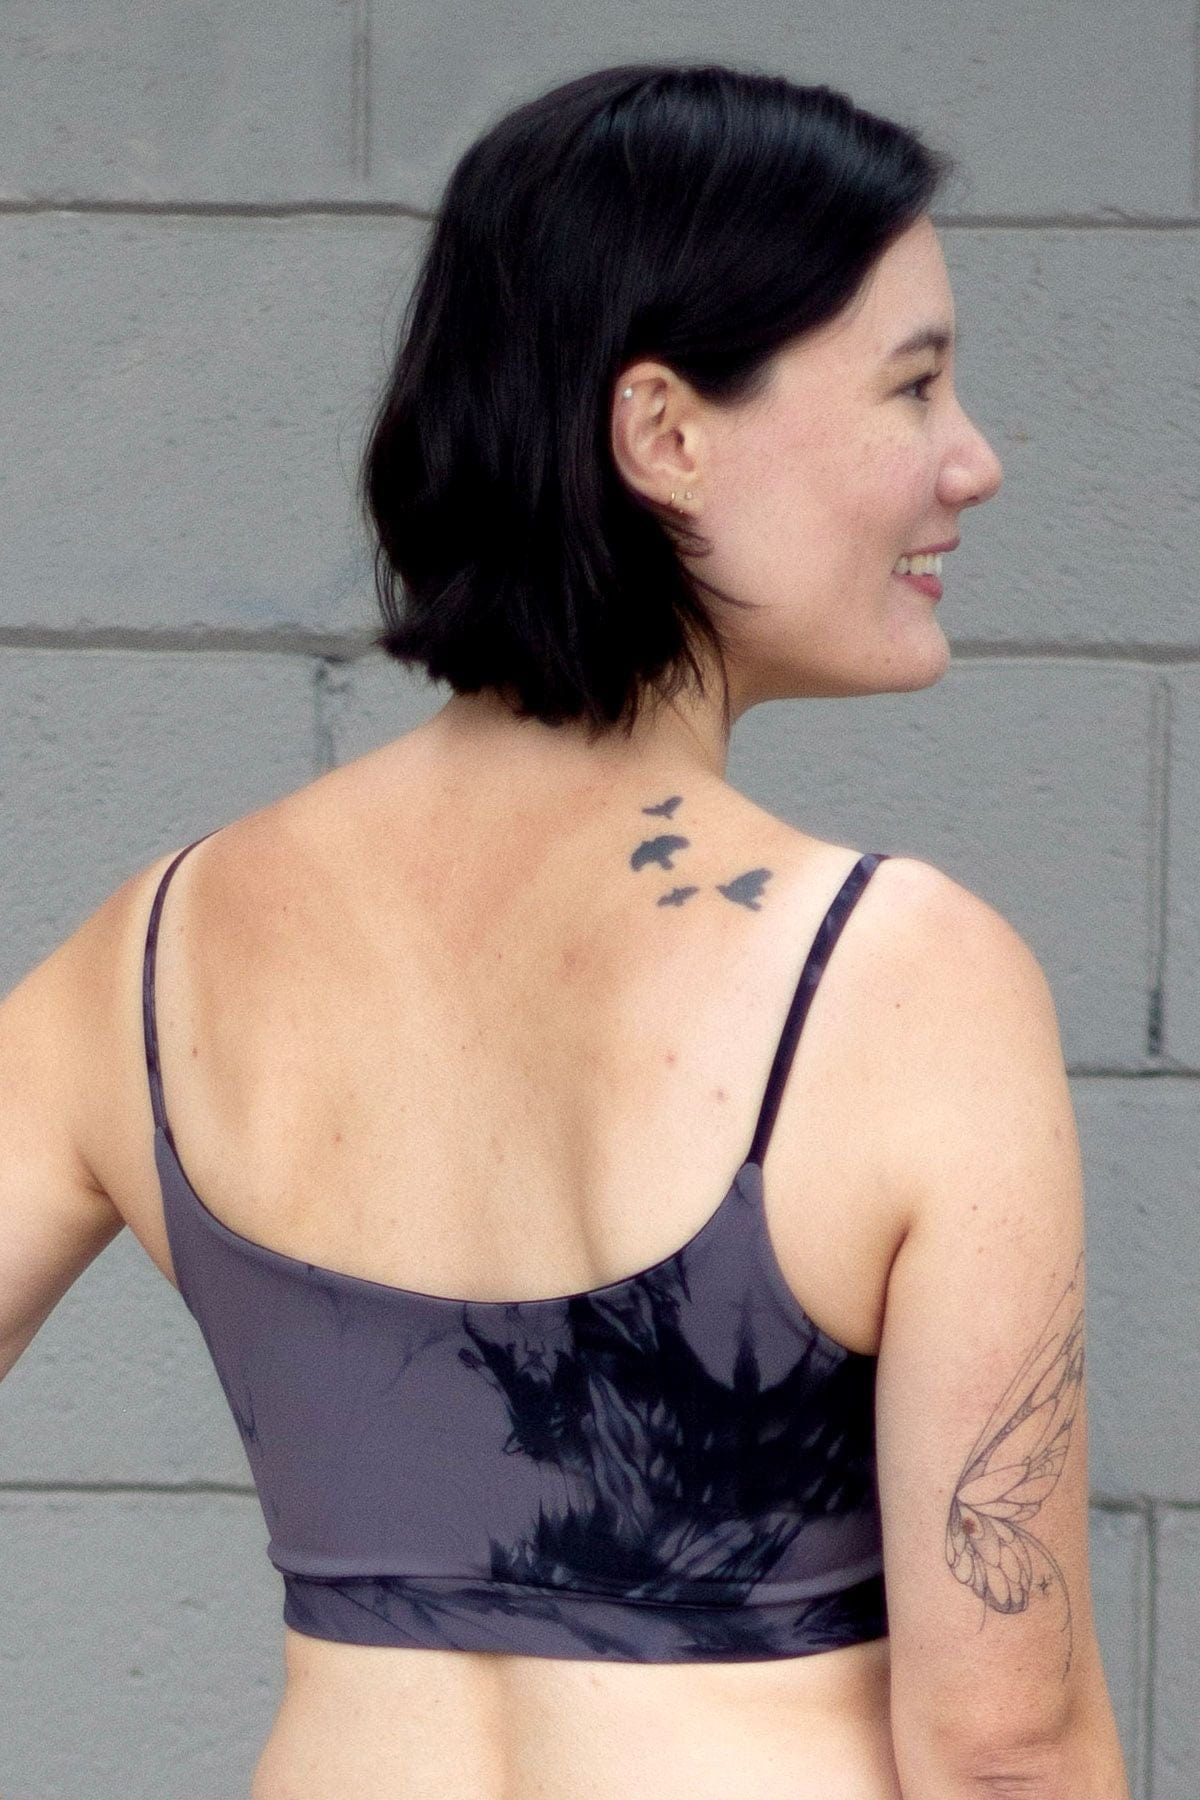 Woman with tattoos wearing a grey swim top